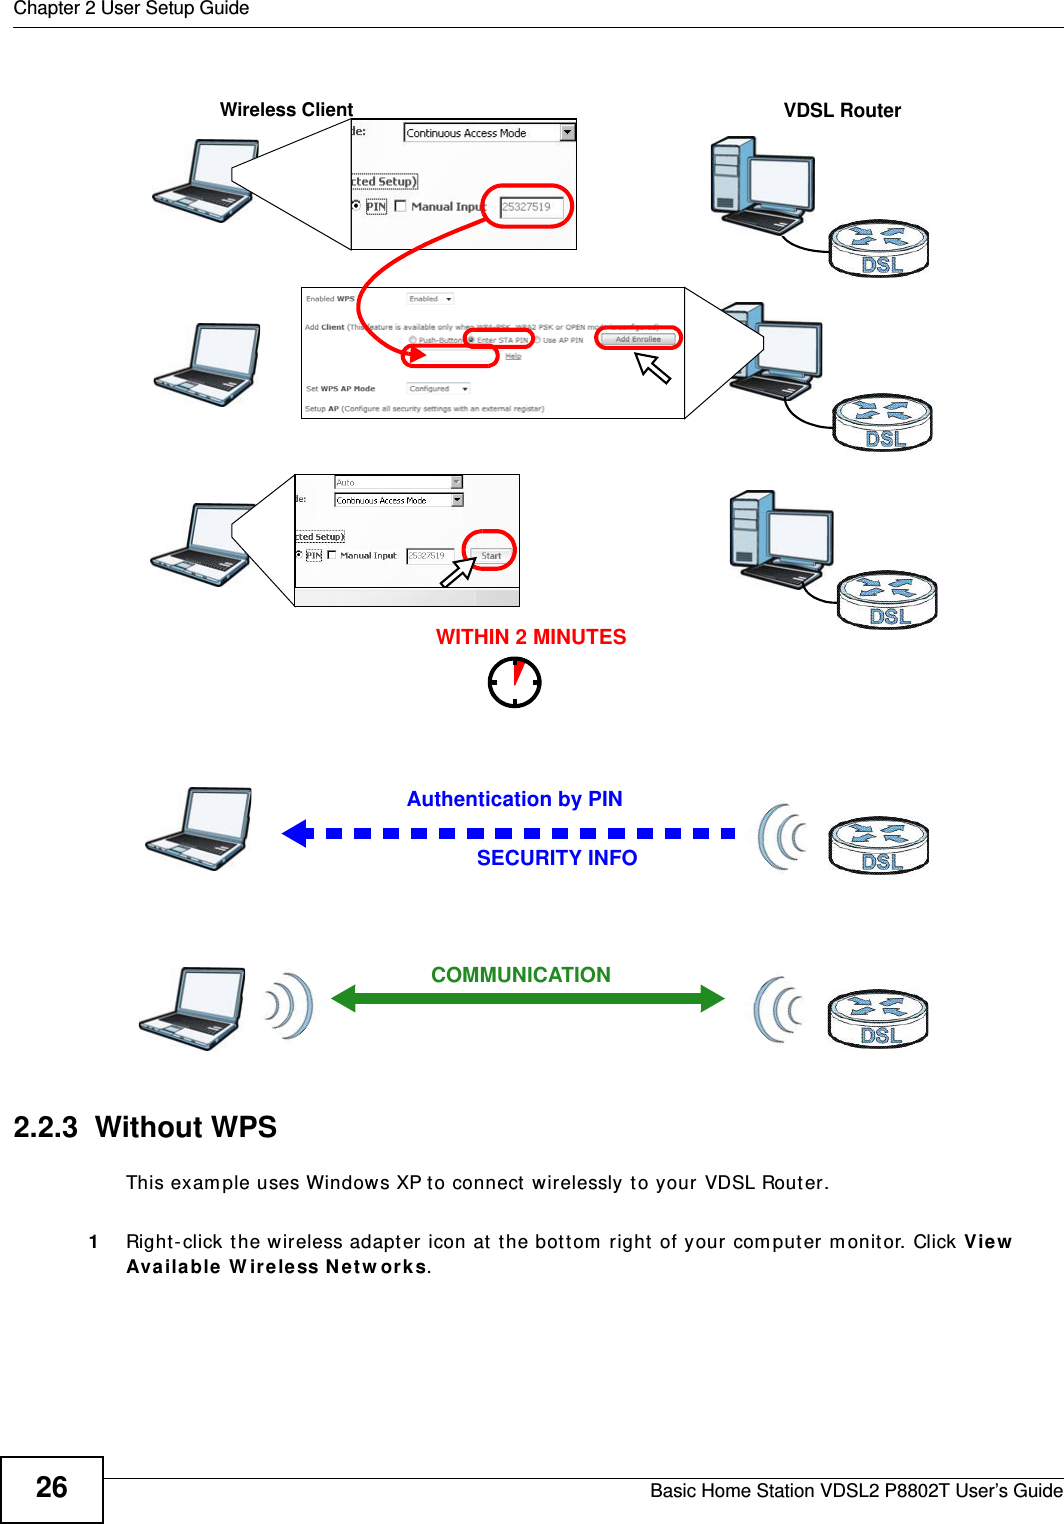 Chapter 2 User Setup GuideBasic Home Station VDSL2 P8802T User’s Guide26Example WPS Process: PIN Method2.2.3  Without WPSThis exam ple uses Windows XP t o connect  wirelessly to your VDSL Router. 1Right- click t he wireless adapter icon at  the bott om  right  of your com puter m onit or. Click Vie w  Available W ire less N etw orks.Authentication by PINSECURITY INFOWITHIN 2 MINUTESWireless ClientVDSL RouterCOMMUNICATION